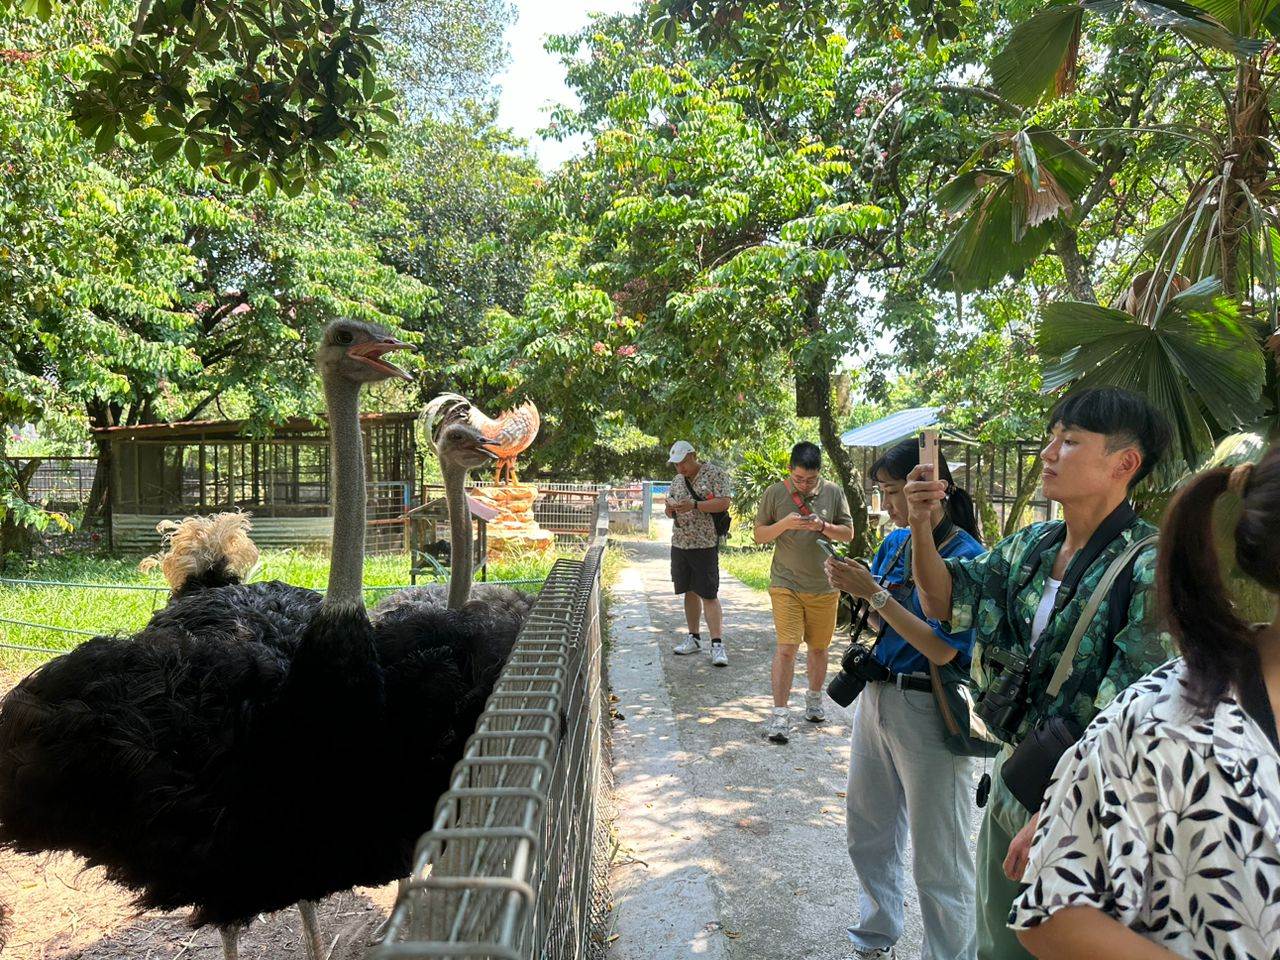 Things to do in Port Dickson - PD Ostrich & Pets Show Farm